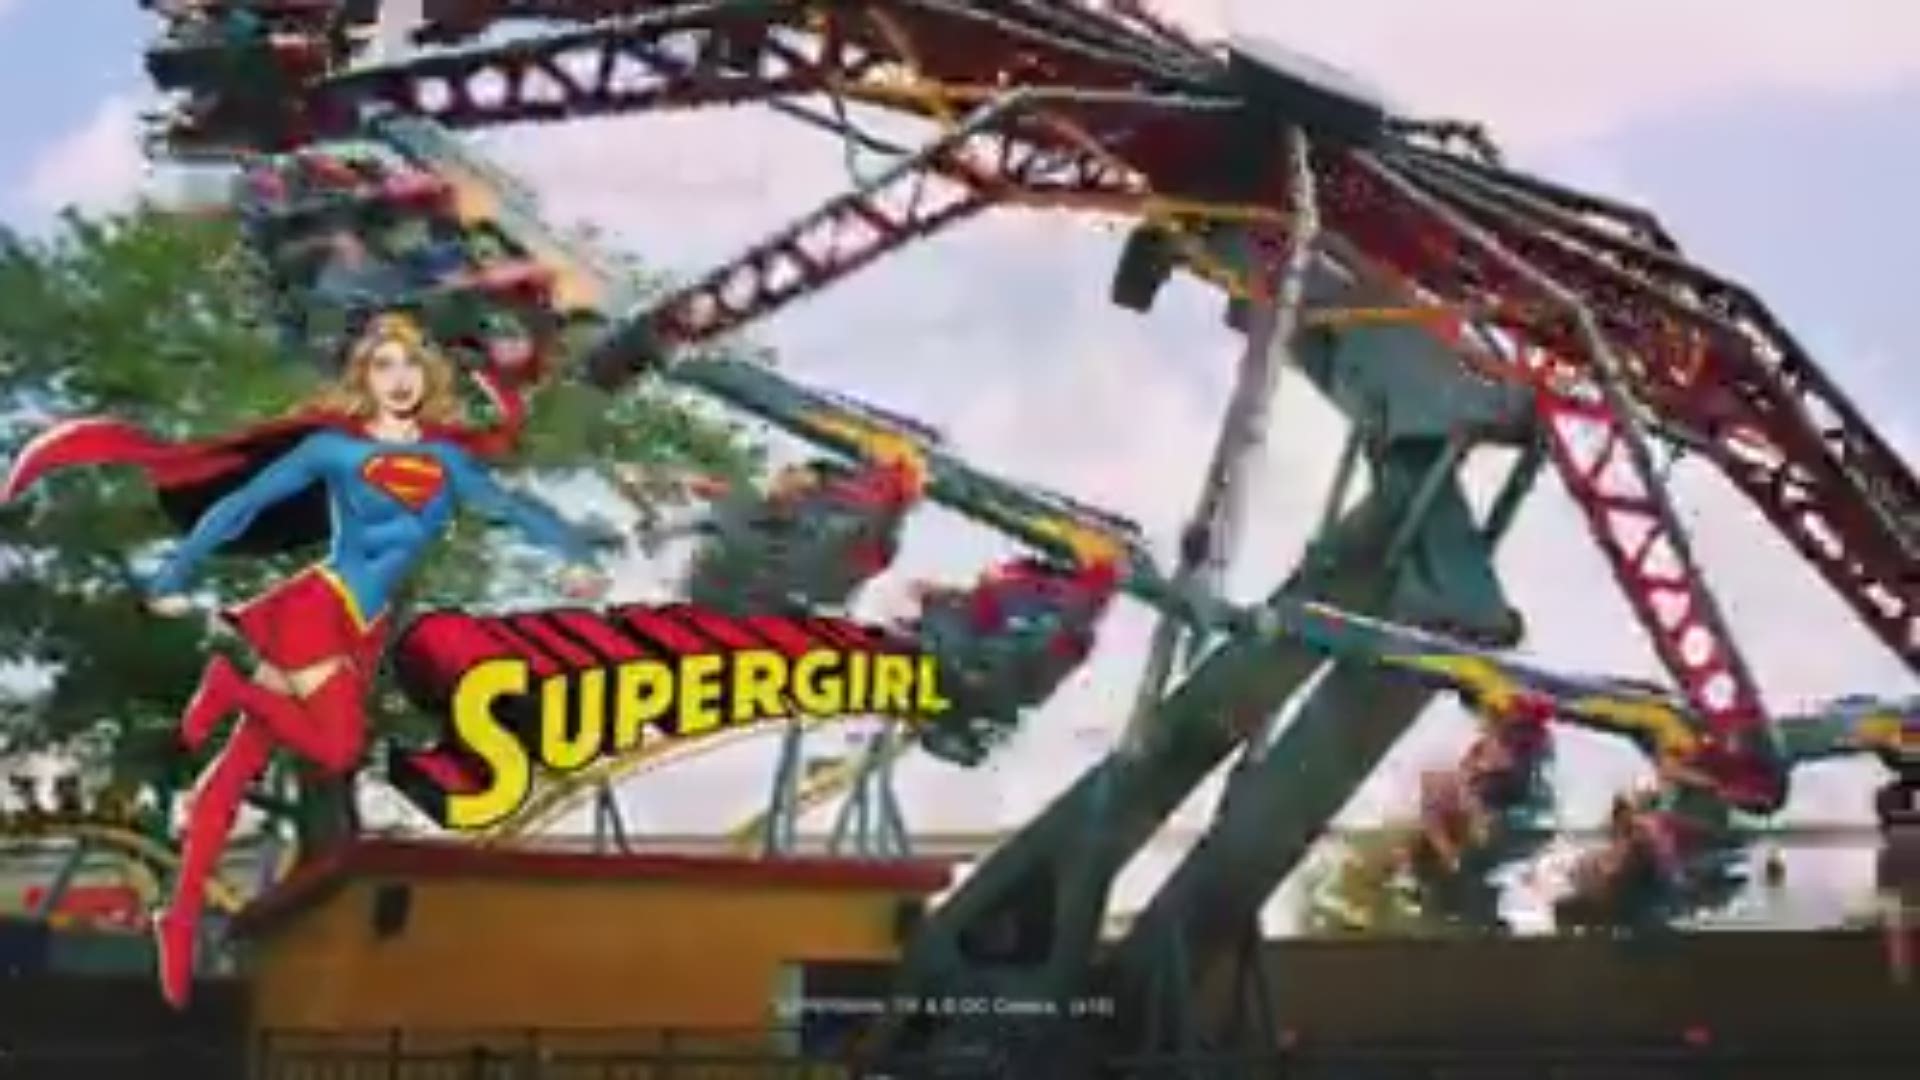 WATCH: Supergirl thrill ride at Six Flags St. Louis | www.bagsaleusa.com